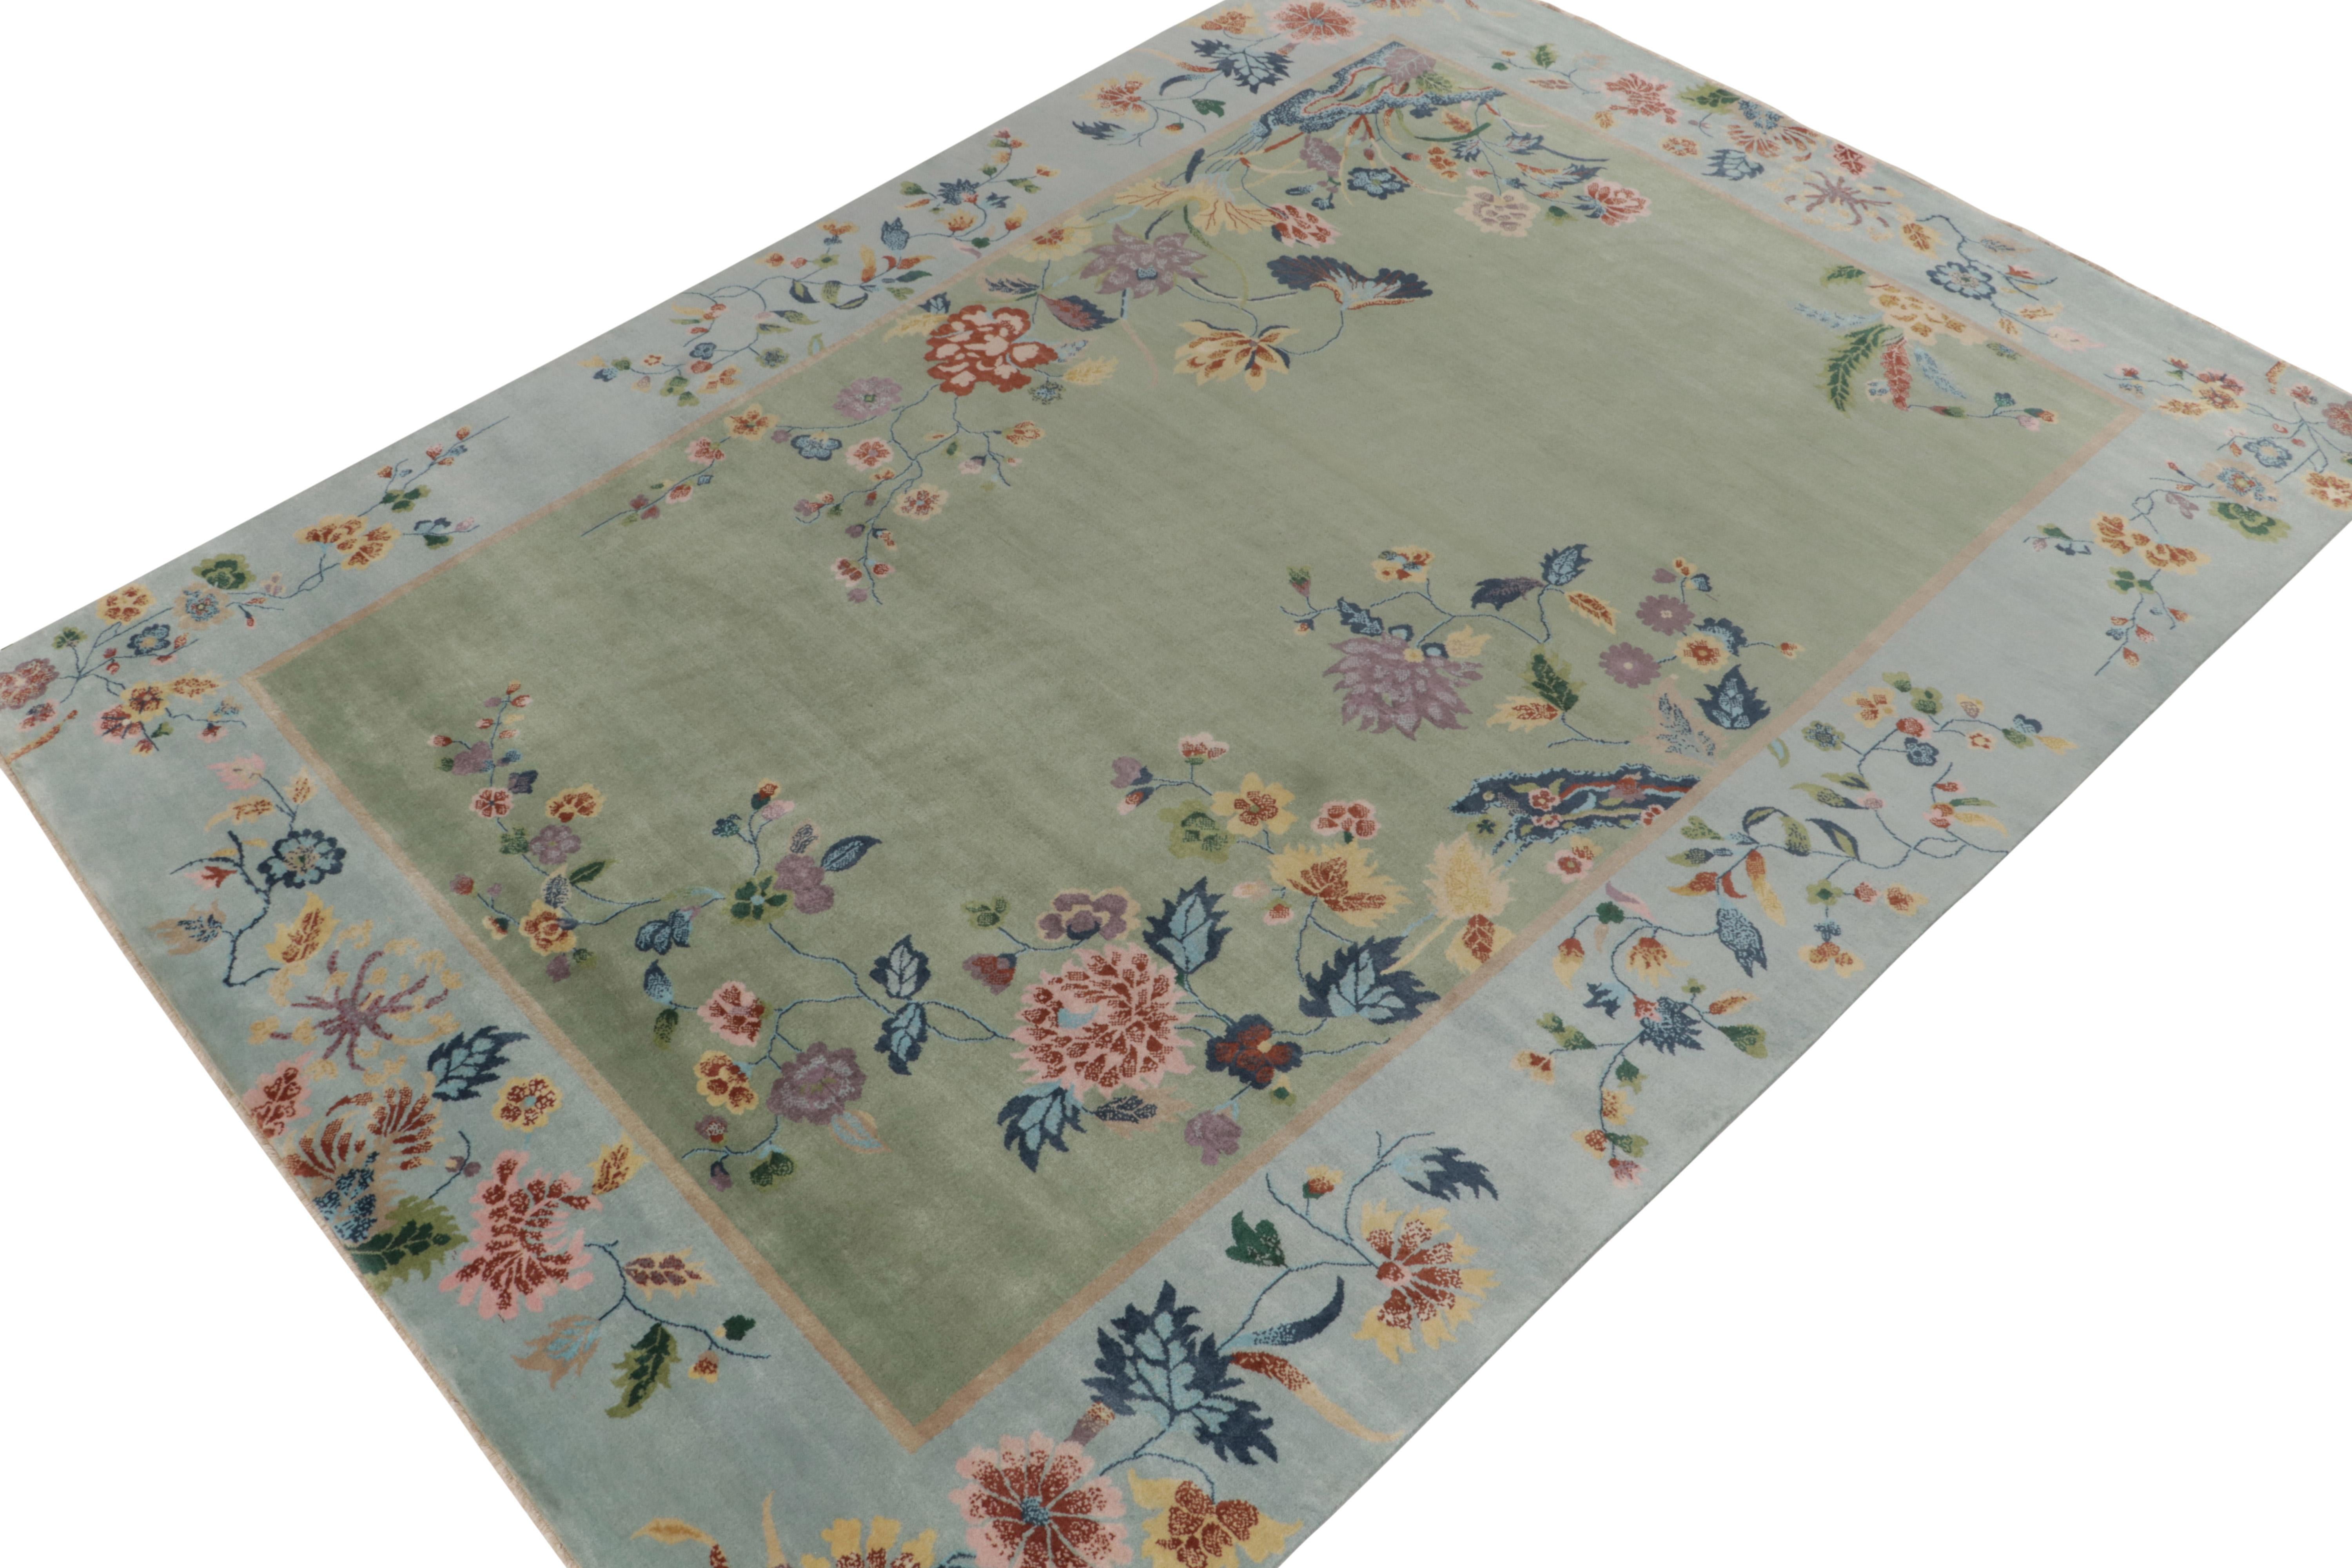 Hand-knotted in wool, a 10x14 ode to Chinese Art Deco rugs from the inspired new Deco Collection by Rug & Kilim. 

On the Design: The bejeweled piece enjoys a pastel green open field beautifully encased in a soft blue border, with floral patterns